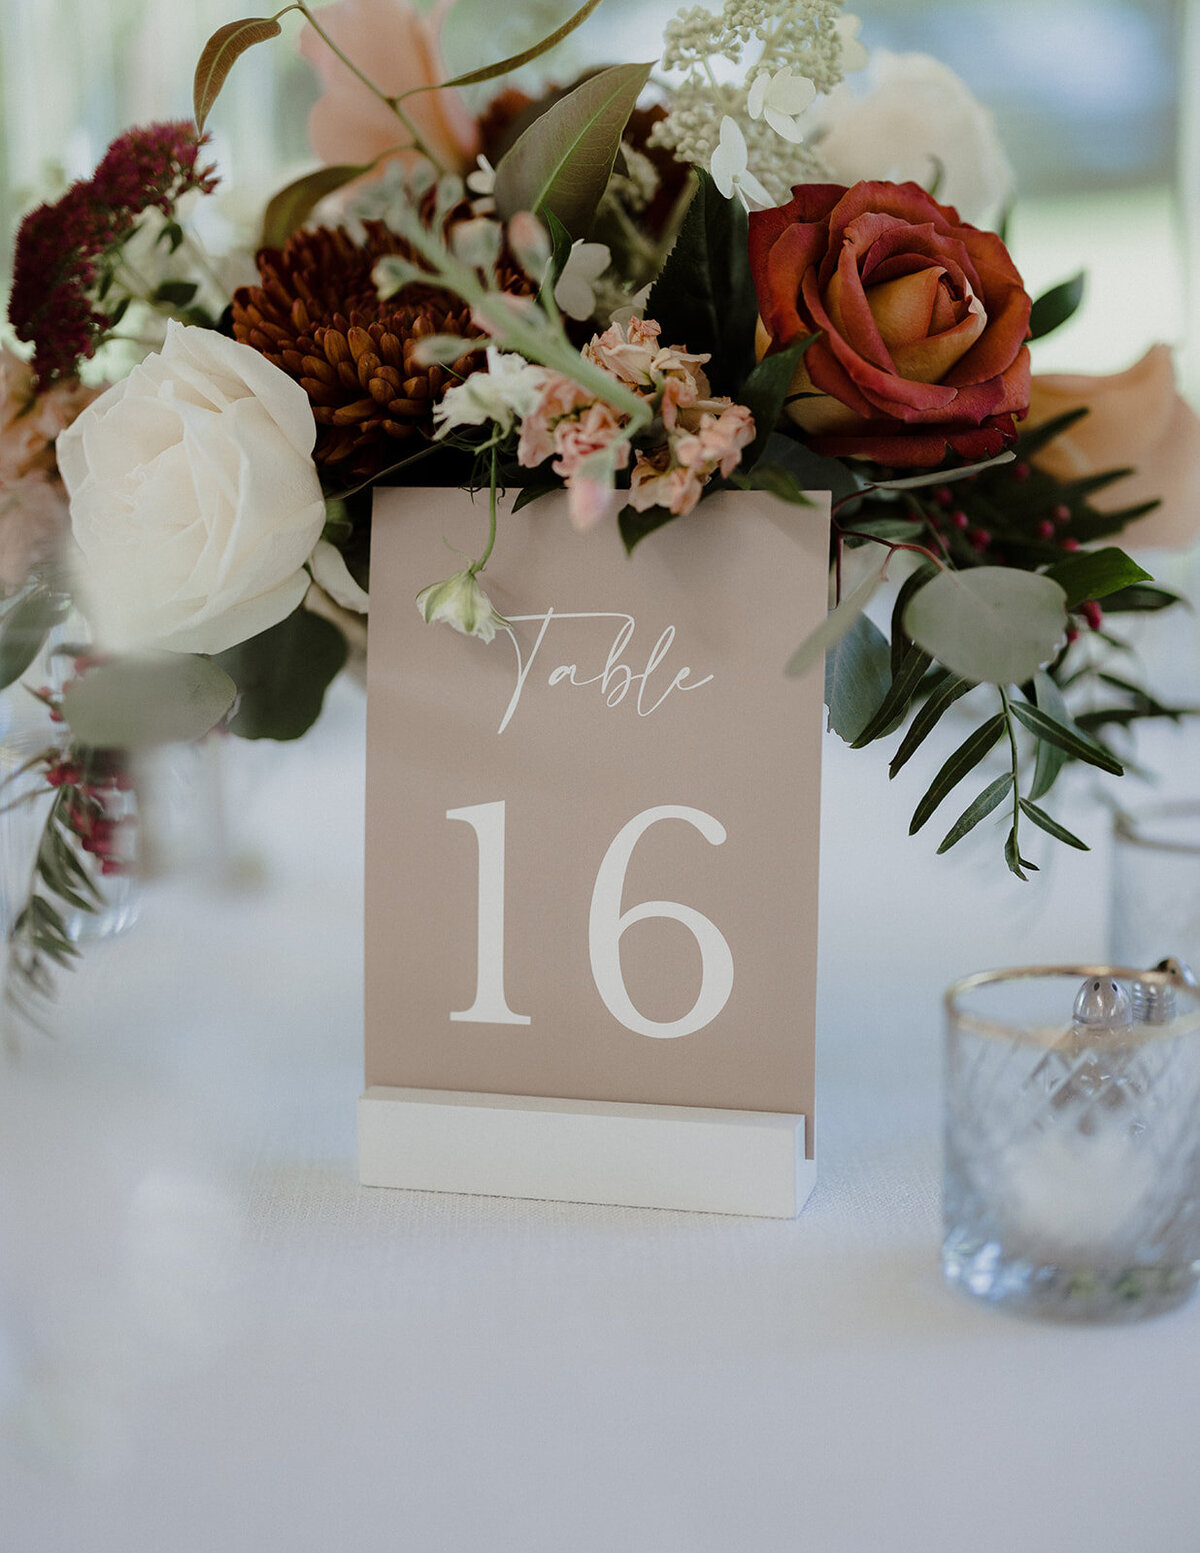 Inns of Aurora Verve Event Co. Finger Lakes Wedding Table Numbers The Kruks Photography-502